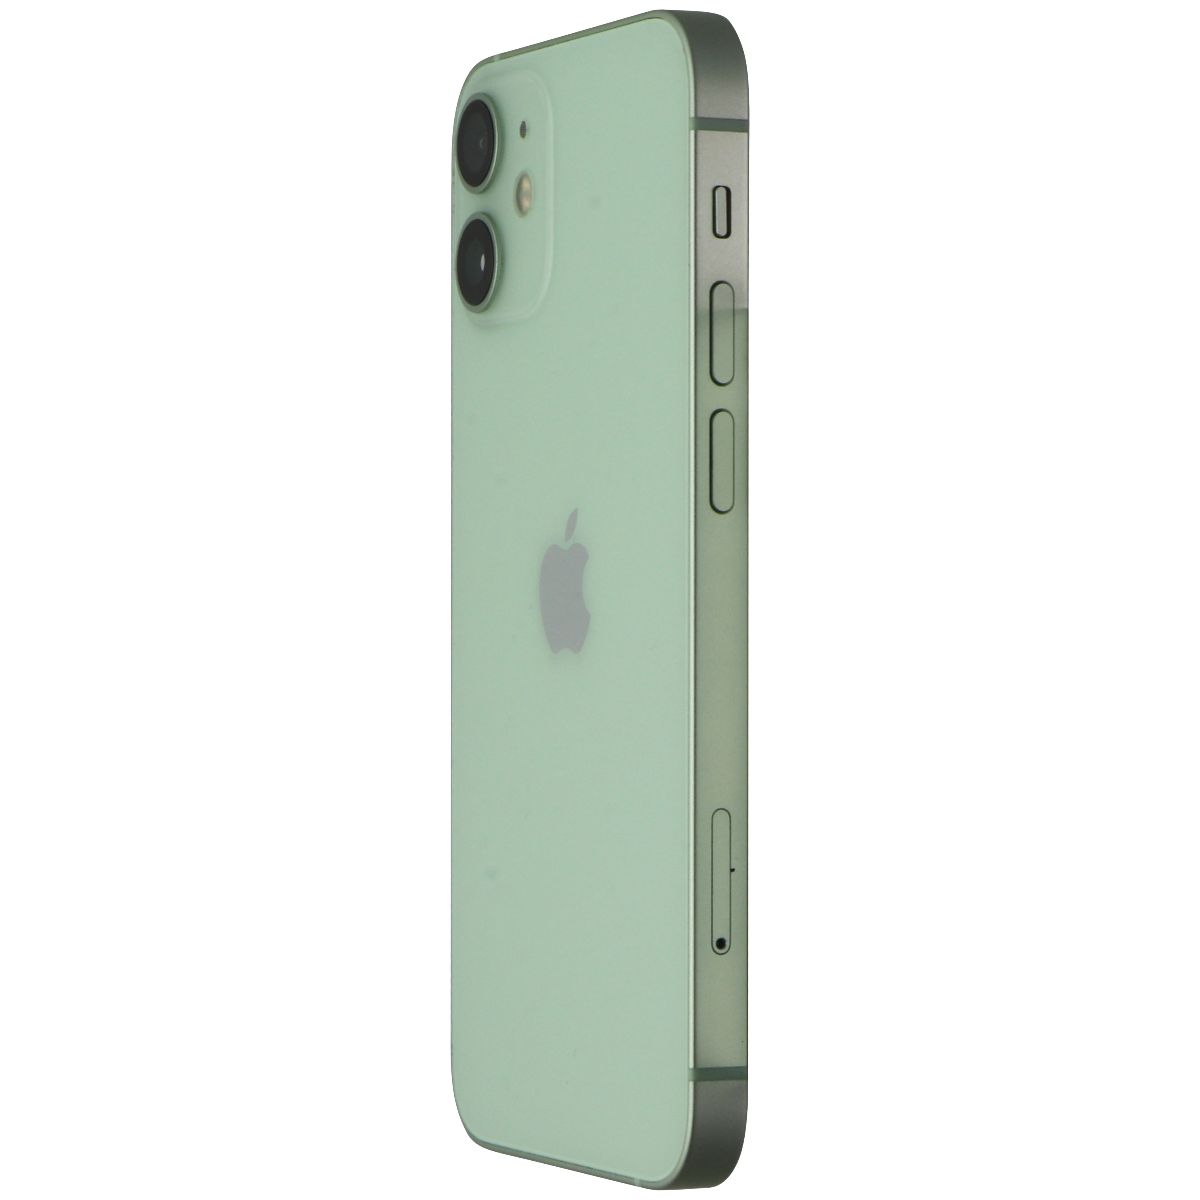 Apple iPhone 12 mini (5.4-inch) (A2176) Unlocked - 64GB/Green *Bad Face ID Cell Phones & Smartphones Apple    - Simple Cell Bulk Wholesale Pricing - USA Seller